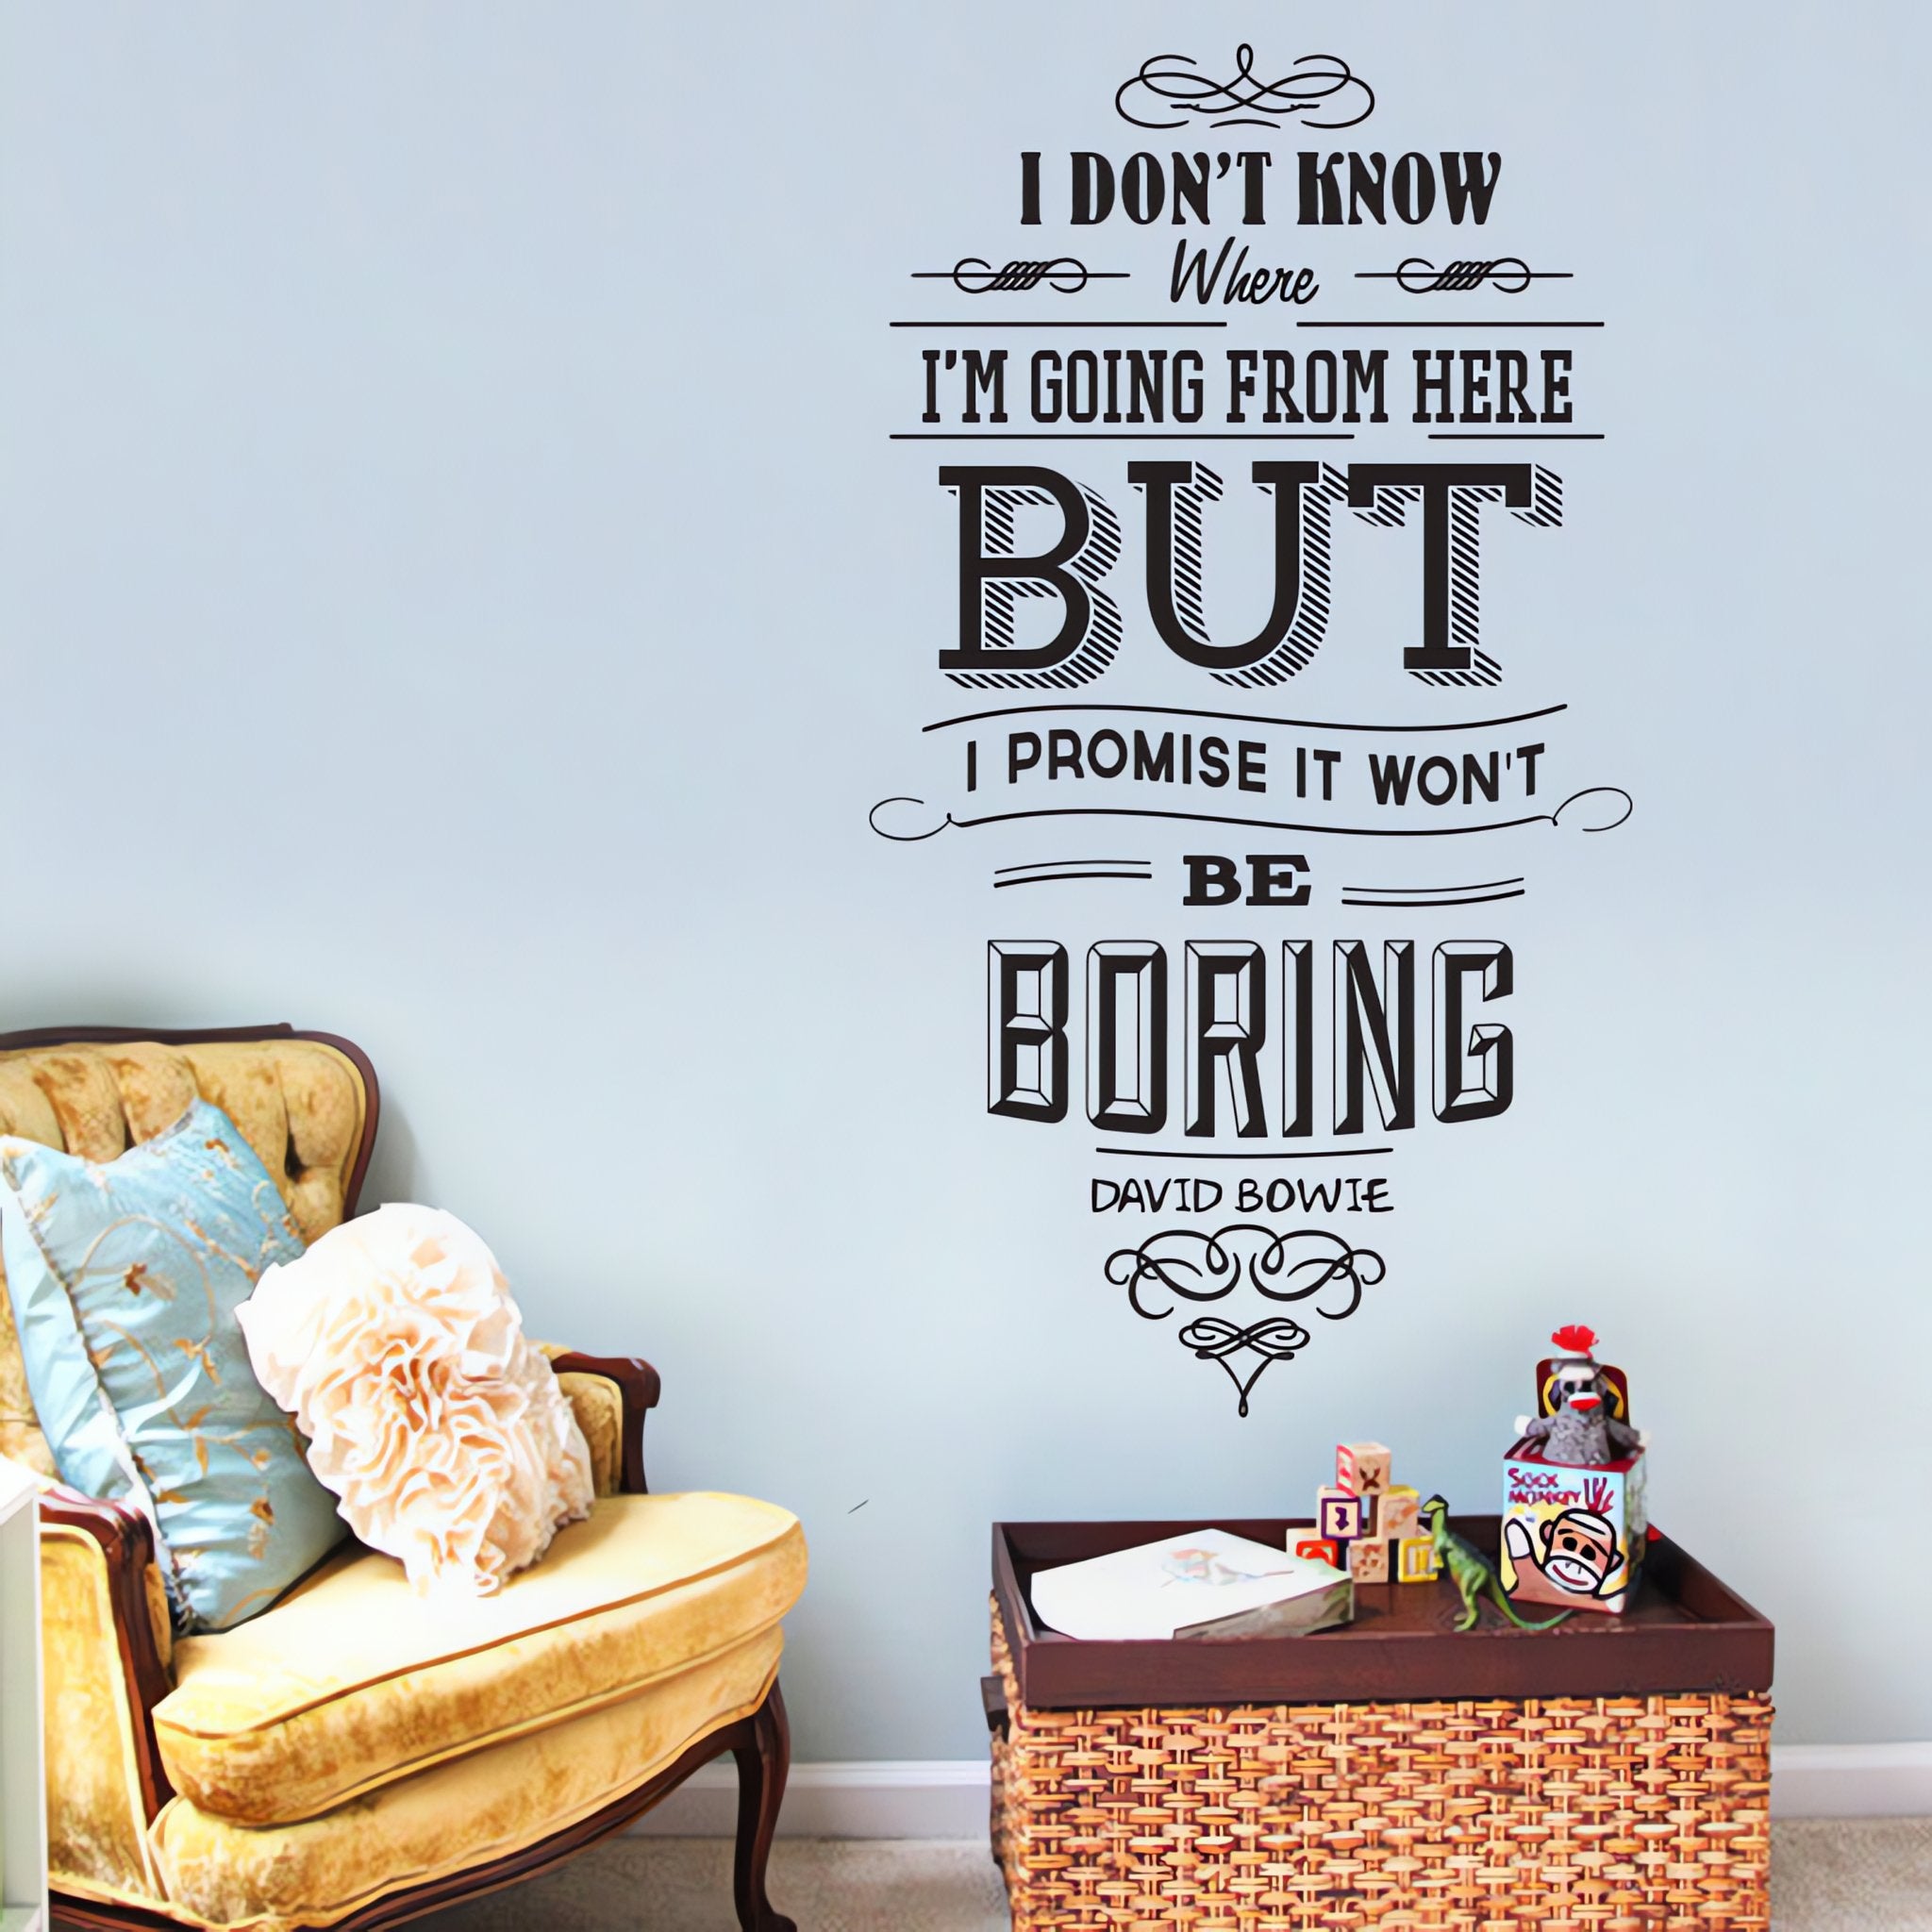 Wall quote sticker with text "I Don't Know Where I Am Going From Here But I Promise It Won't Be Boring" in a living room with a chair and table.